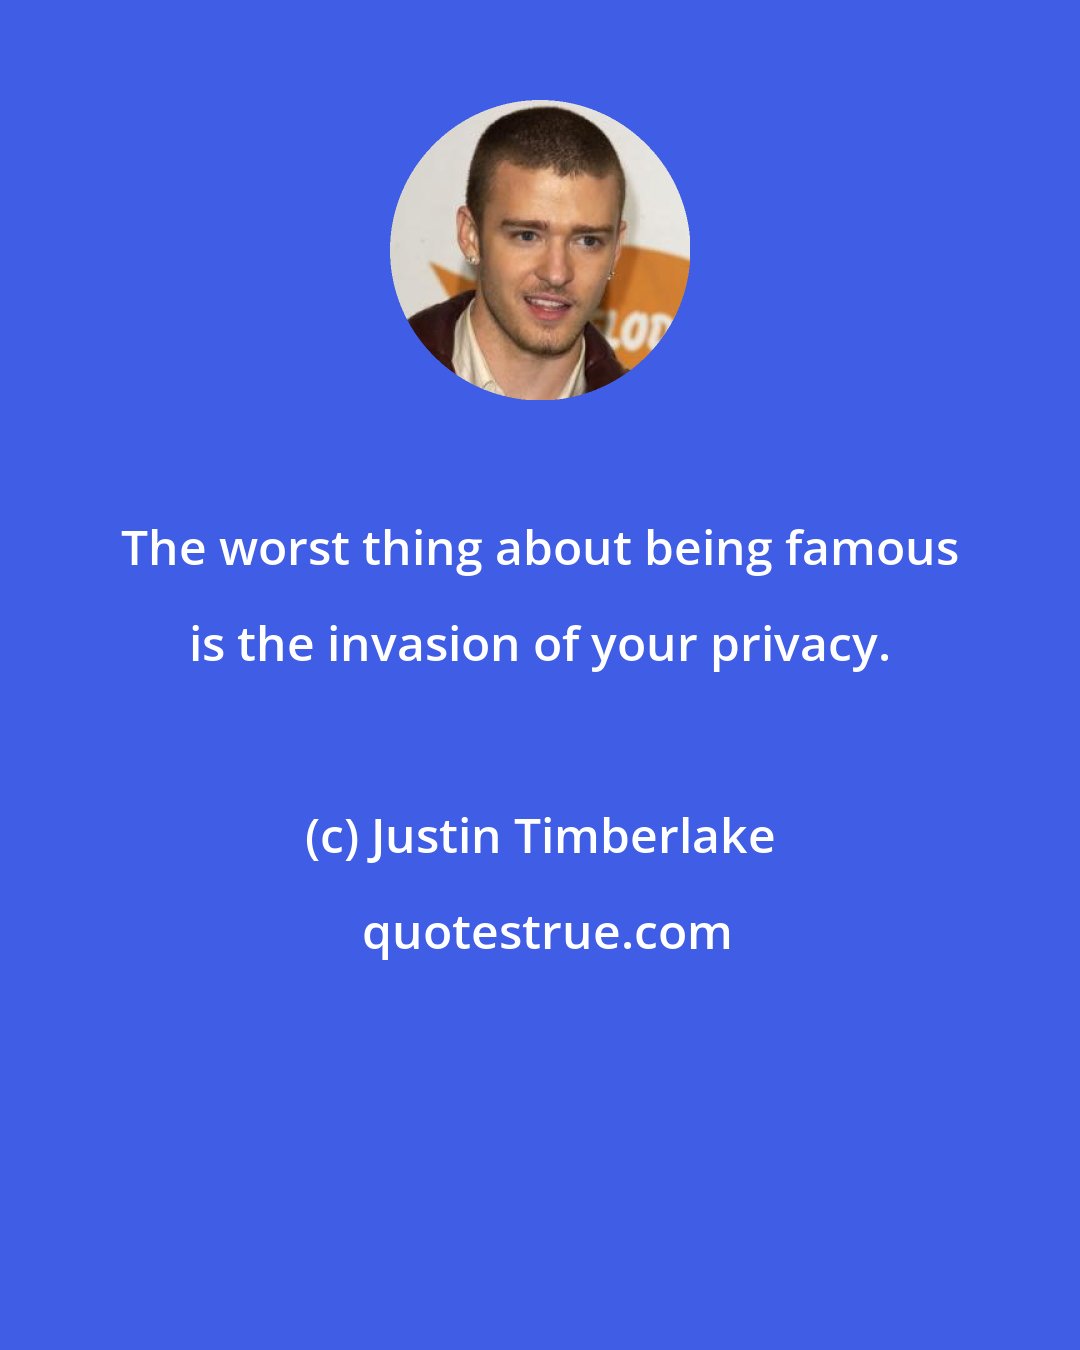 Justin Timberlake: The worst thing about being famous is the invasion of your privacy.